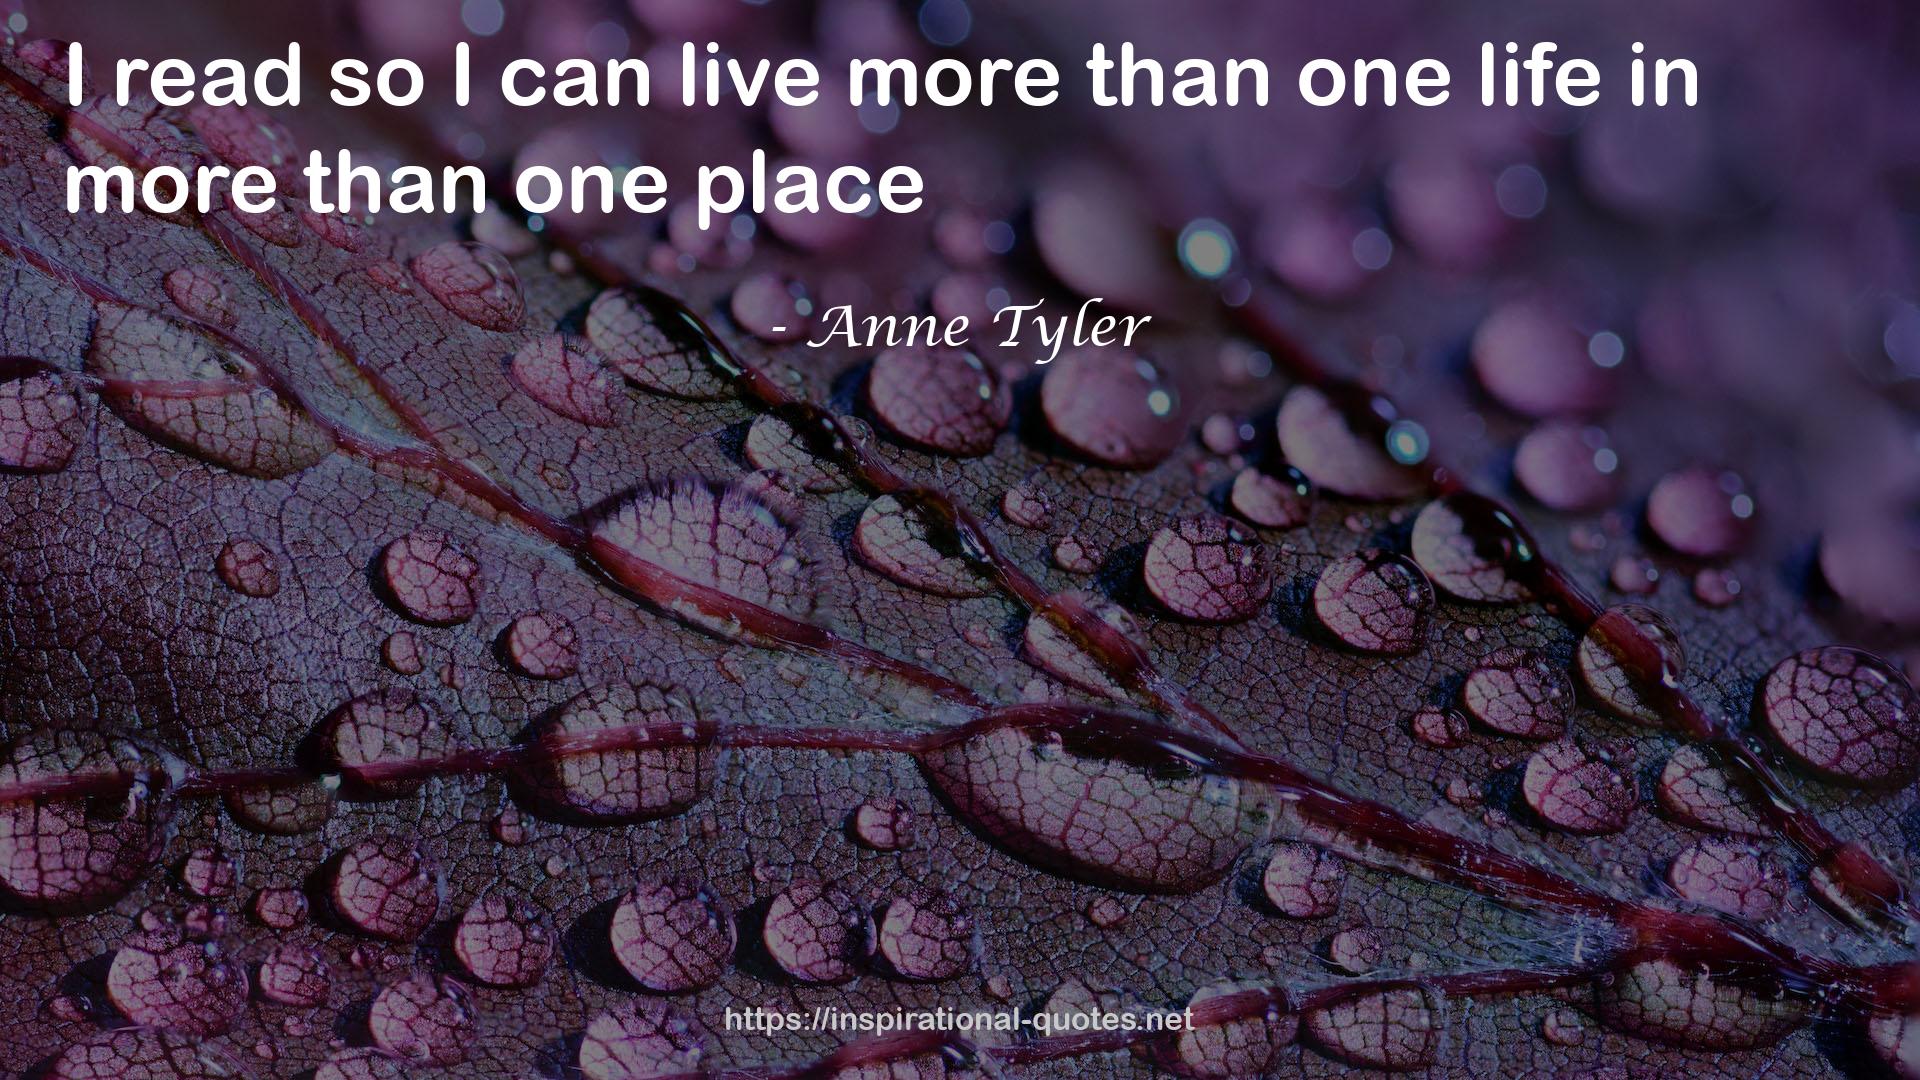 Anne Tyler QUOTES